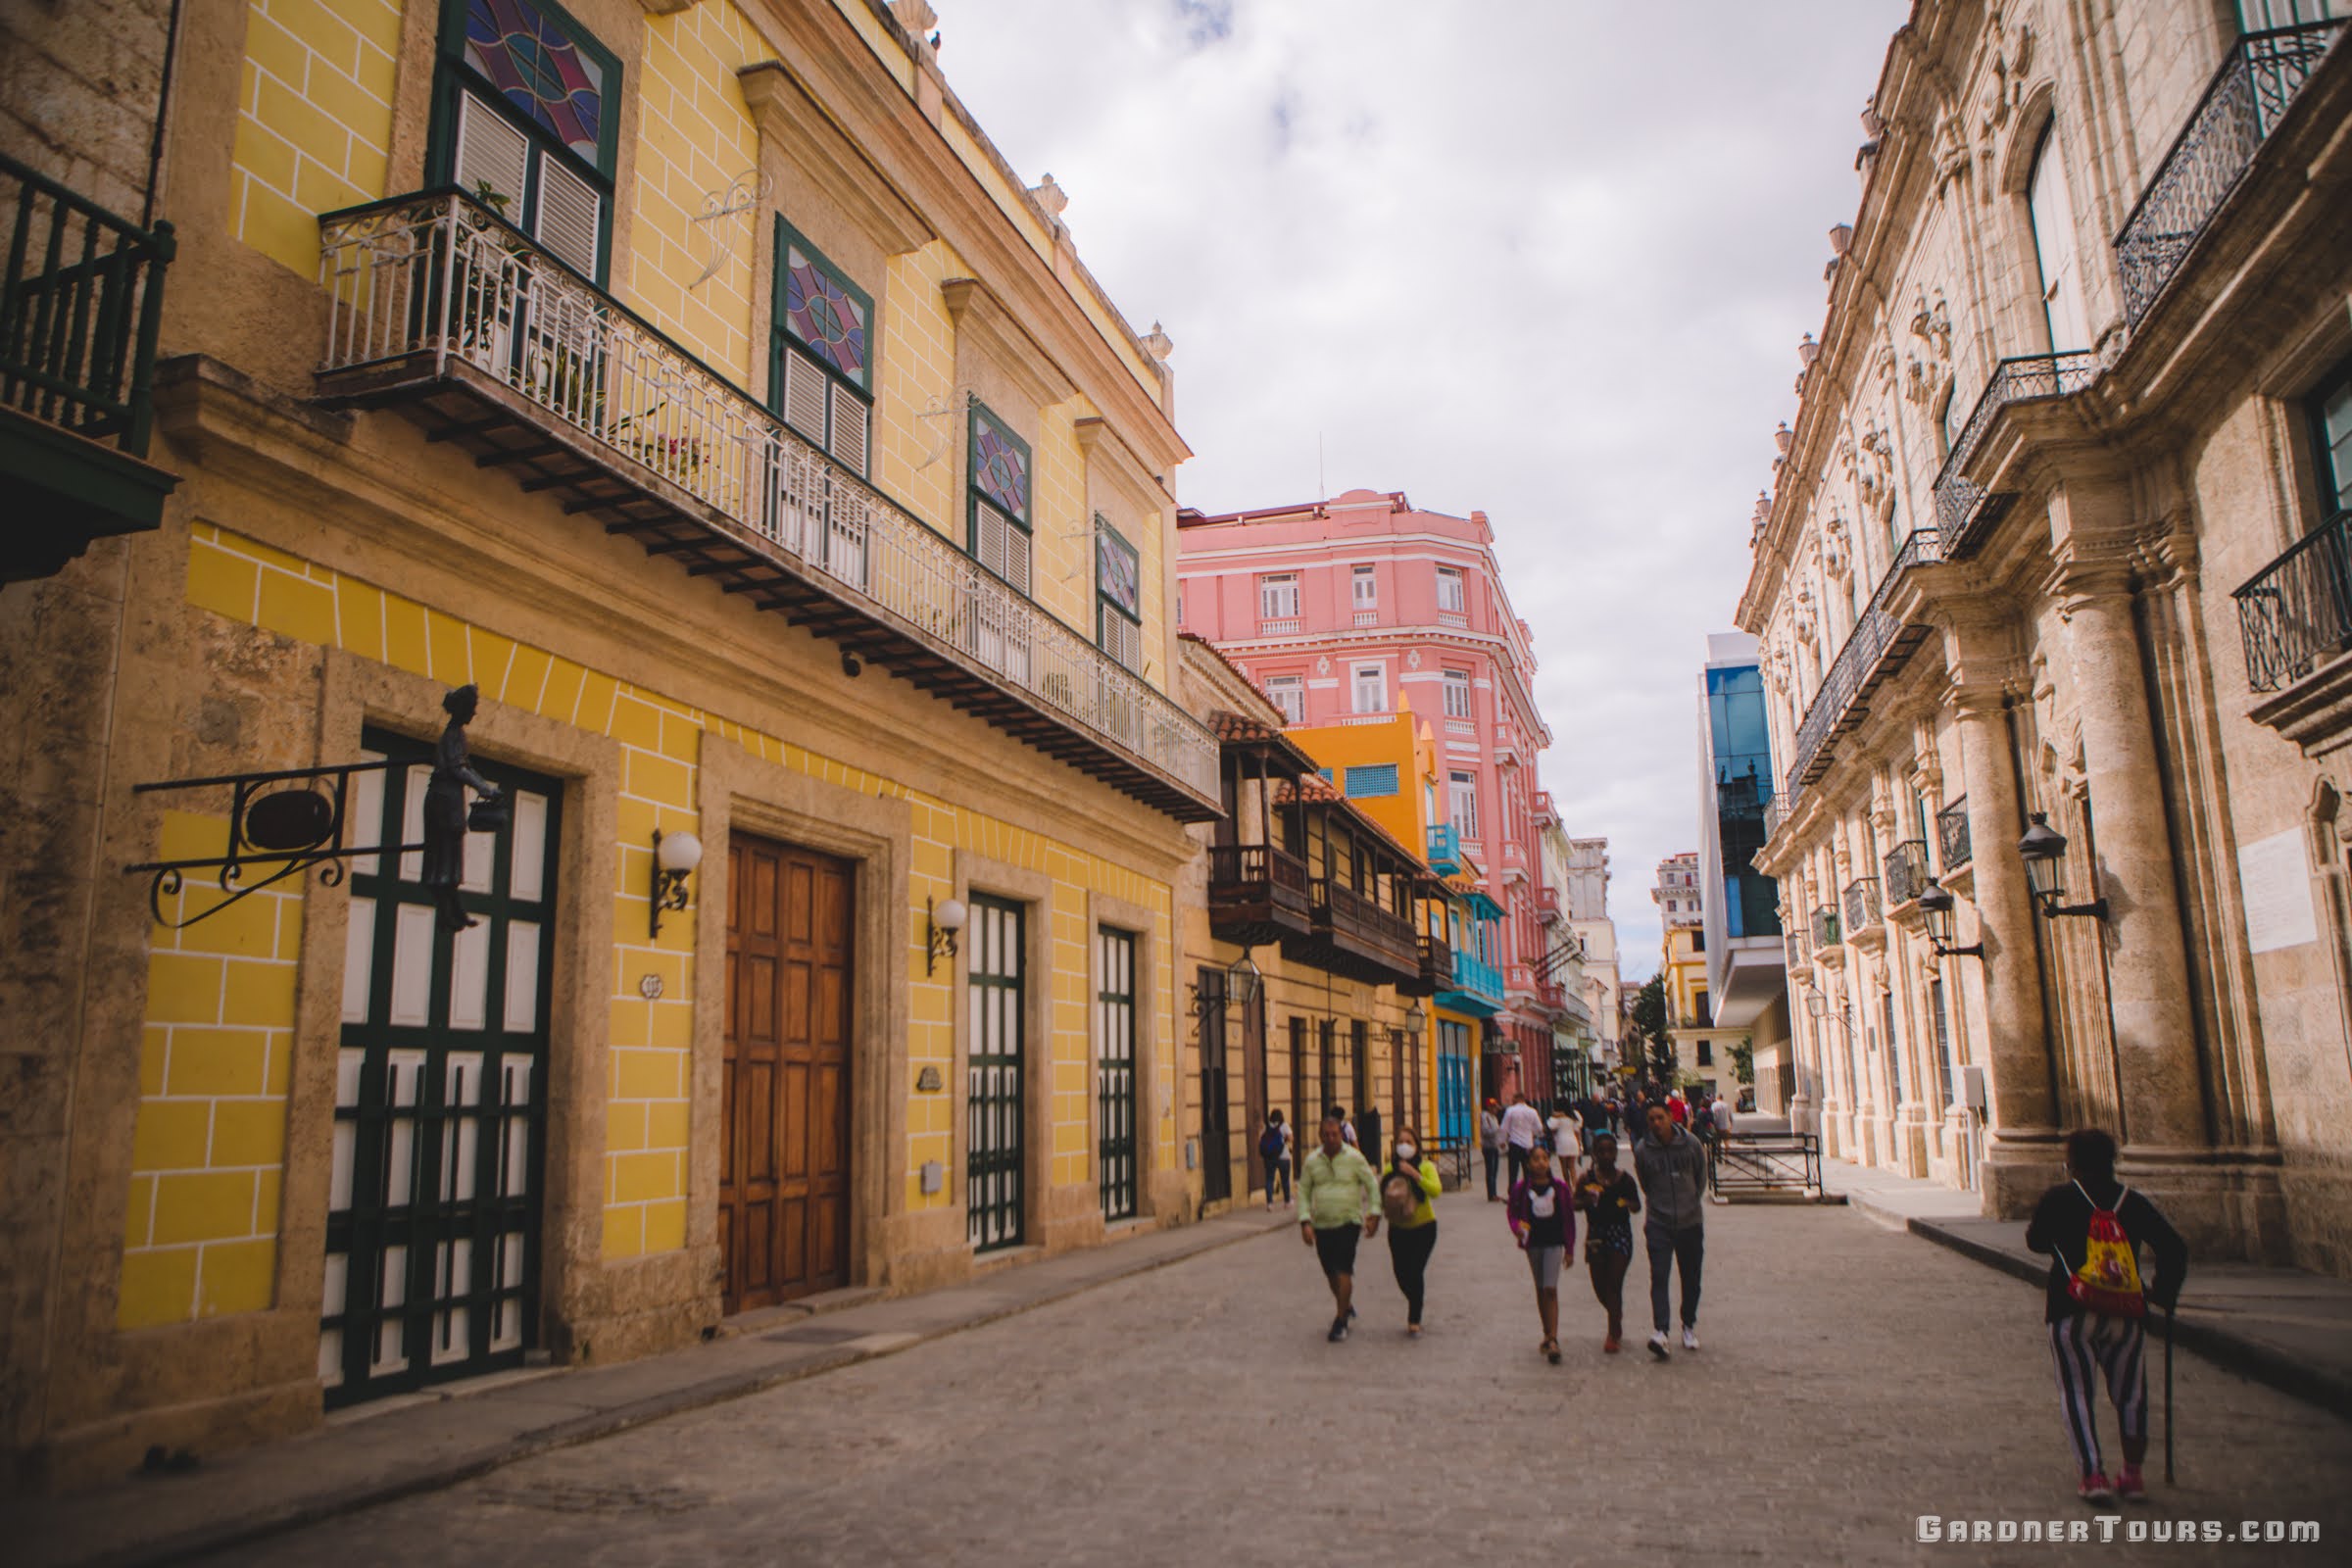 People Walking in the Streets with Yellow Painted Buildings of Old Havana, Cuba